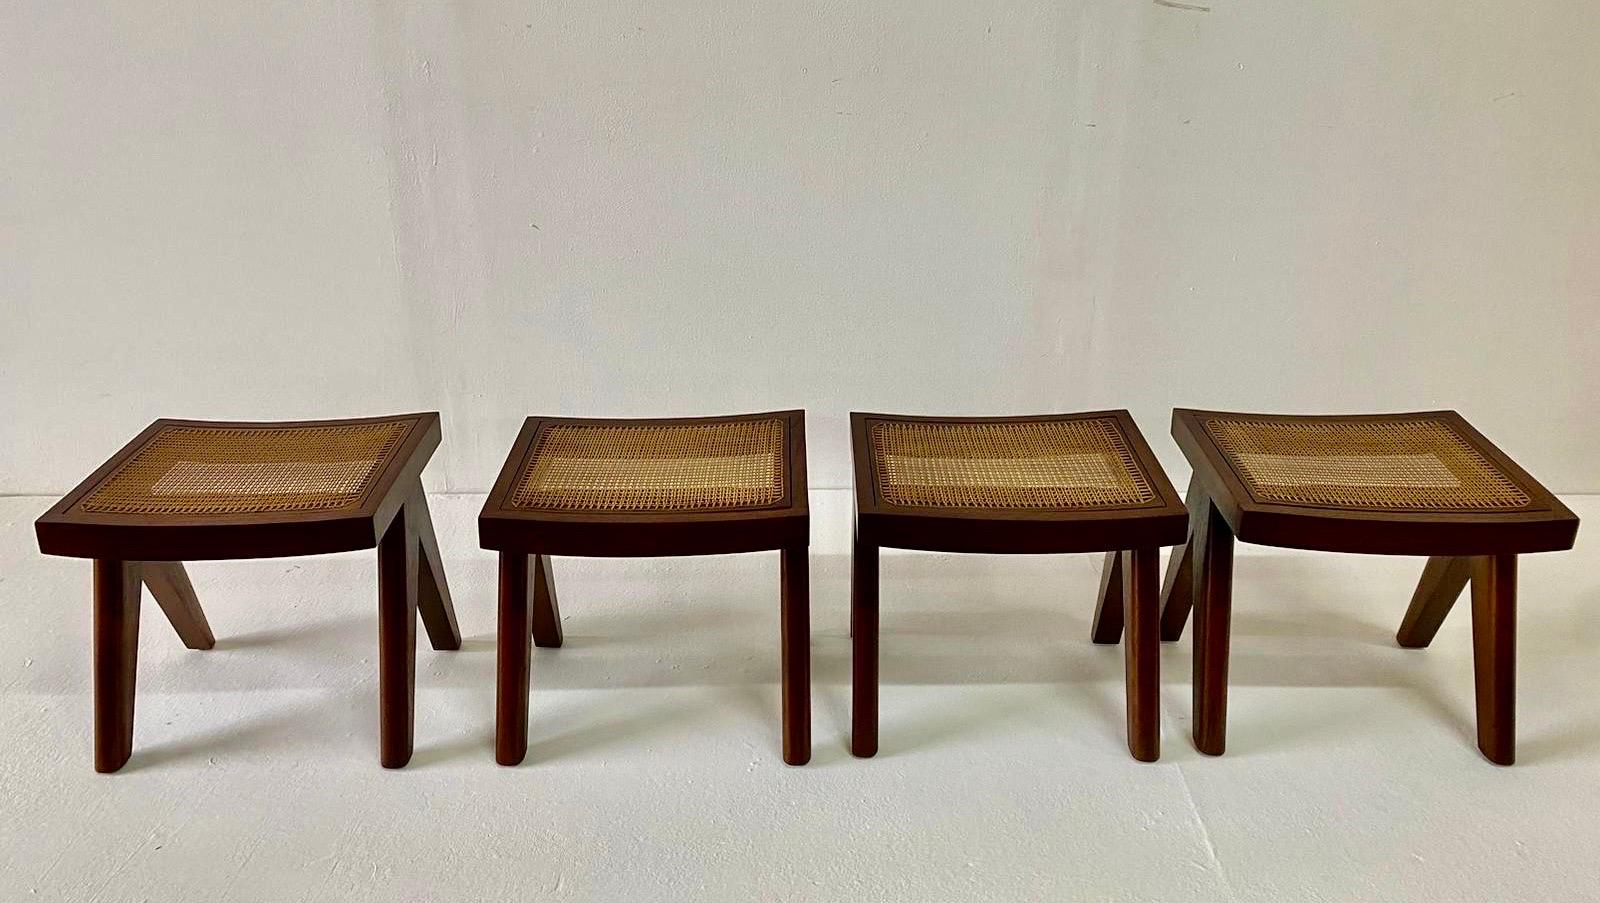 Studio Made Heavy Teak Stools - Manner of Jeanneret (2 Pairs Available) For Sale 7